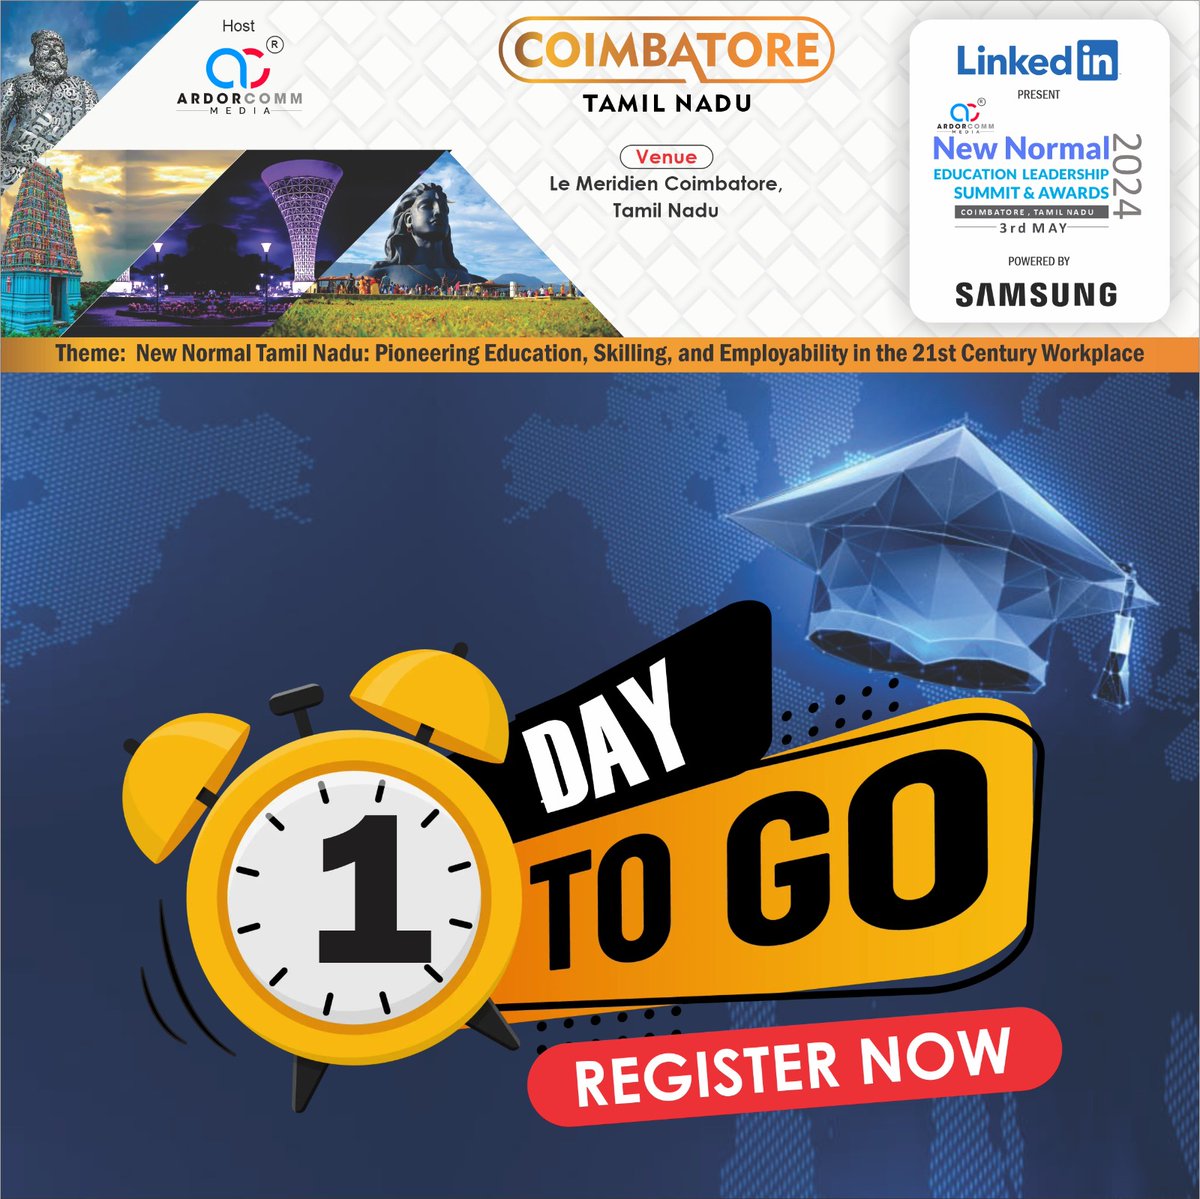 1 Days to Go!  ArdorComm Media in association with LinkedIn presents “NEW NORMAL- EDUCATION LEADERSHIP SUMMIT & AWARDS 2024”, at Hotel Le Méridien Coimbatore, TN on 3rd May 2024    

Visit Us: ardorcomm-media.com/elsacoimbatore/ 

#ELSATamilNadu #ELSACoimbatore #NewNormal #ArdorComm